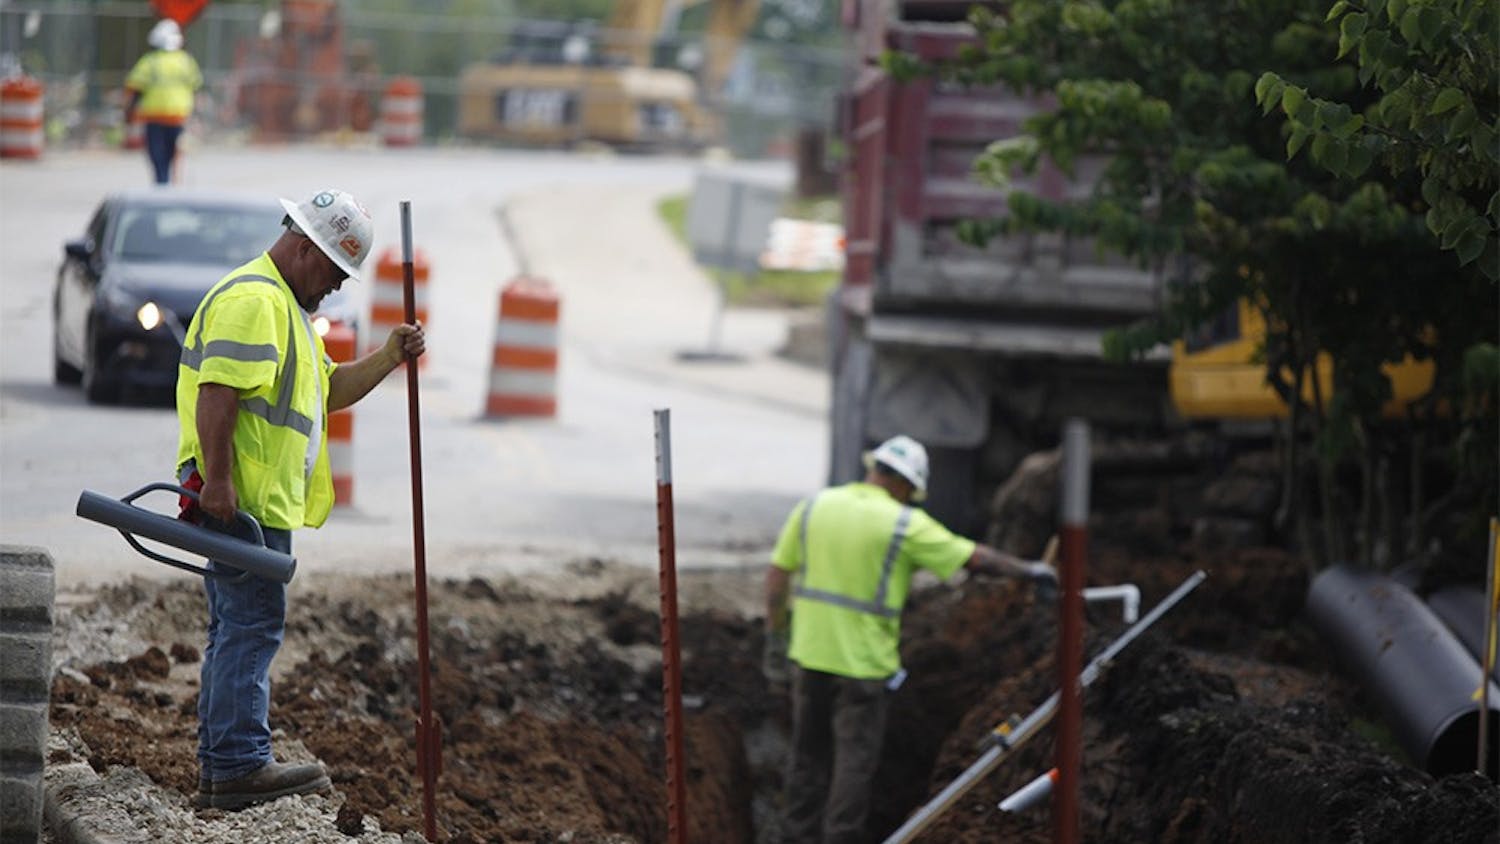 Jeff Gott, a superintendent with Milestone Contractors, drives beams into the ground on Jordan Ave. Wednesday.  Construction has been slowed down by the rain, but construction workers have been working through the rain to get the job done, he said.